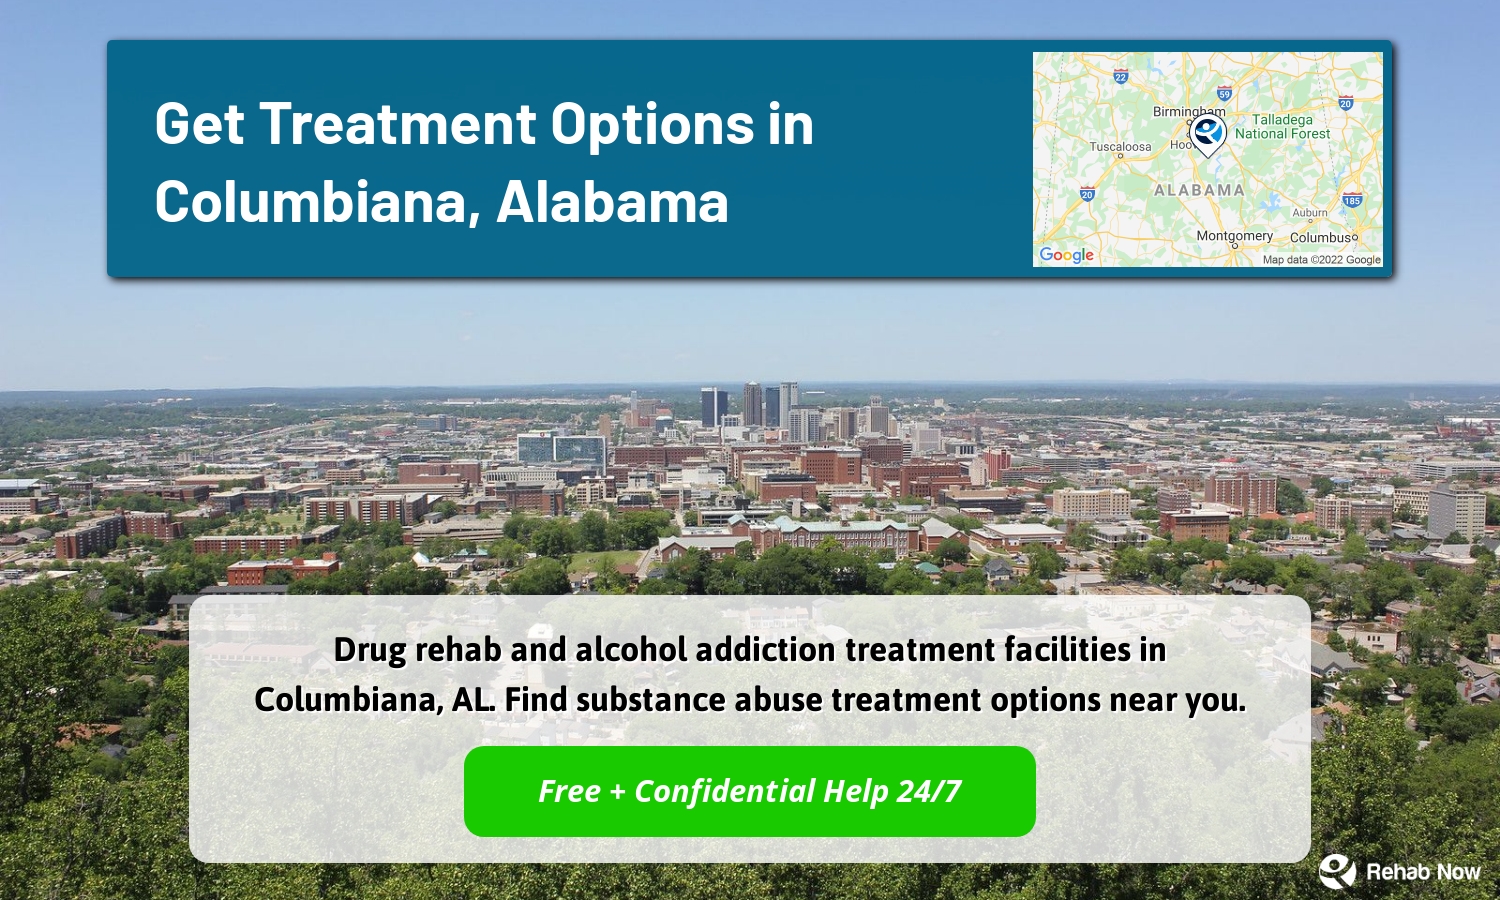 Drug rehab and alcohol addiction treatment facilities in Columbiana, AL. Find substance abuse treatment options near you.